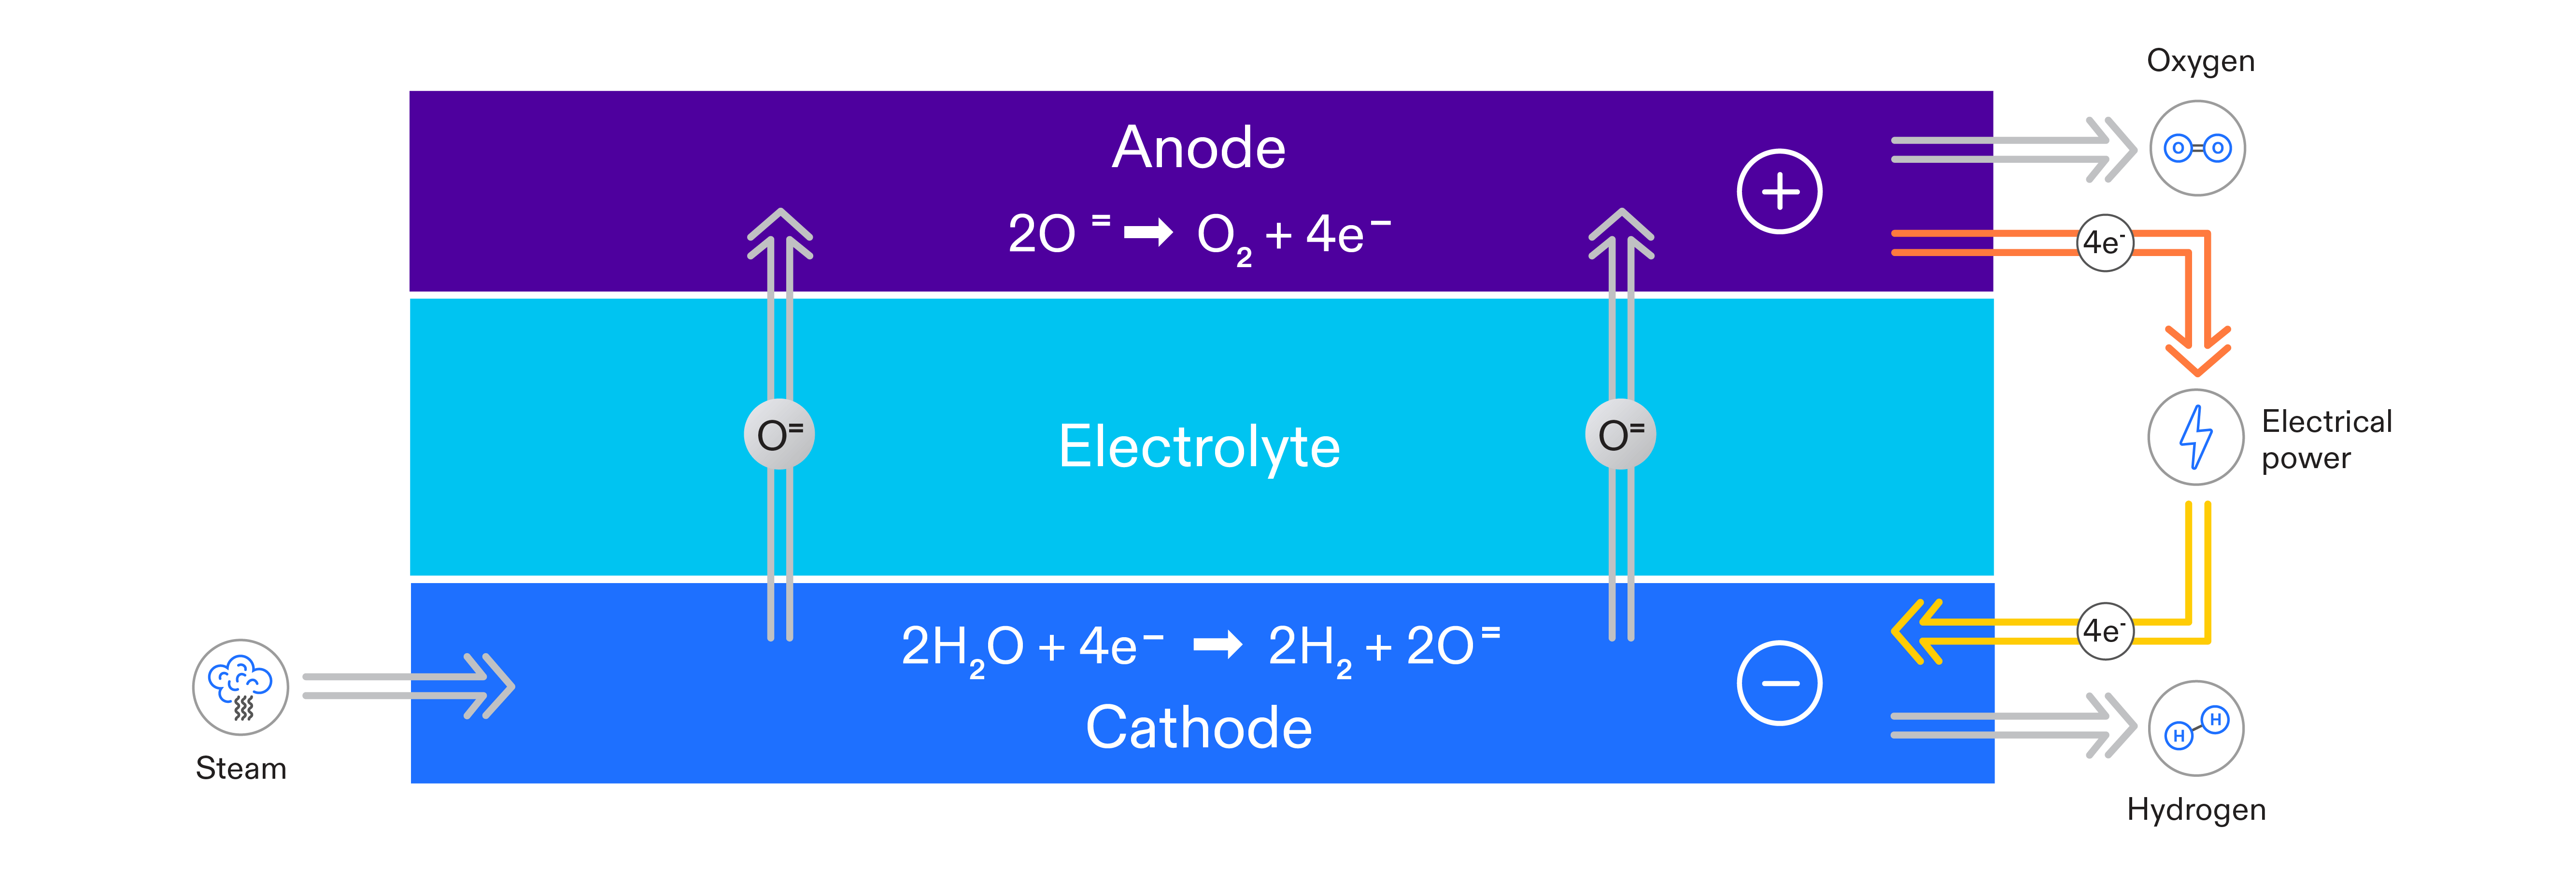 solid-oxide-electrolysis-schematic